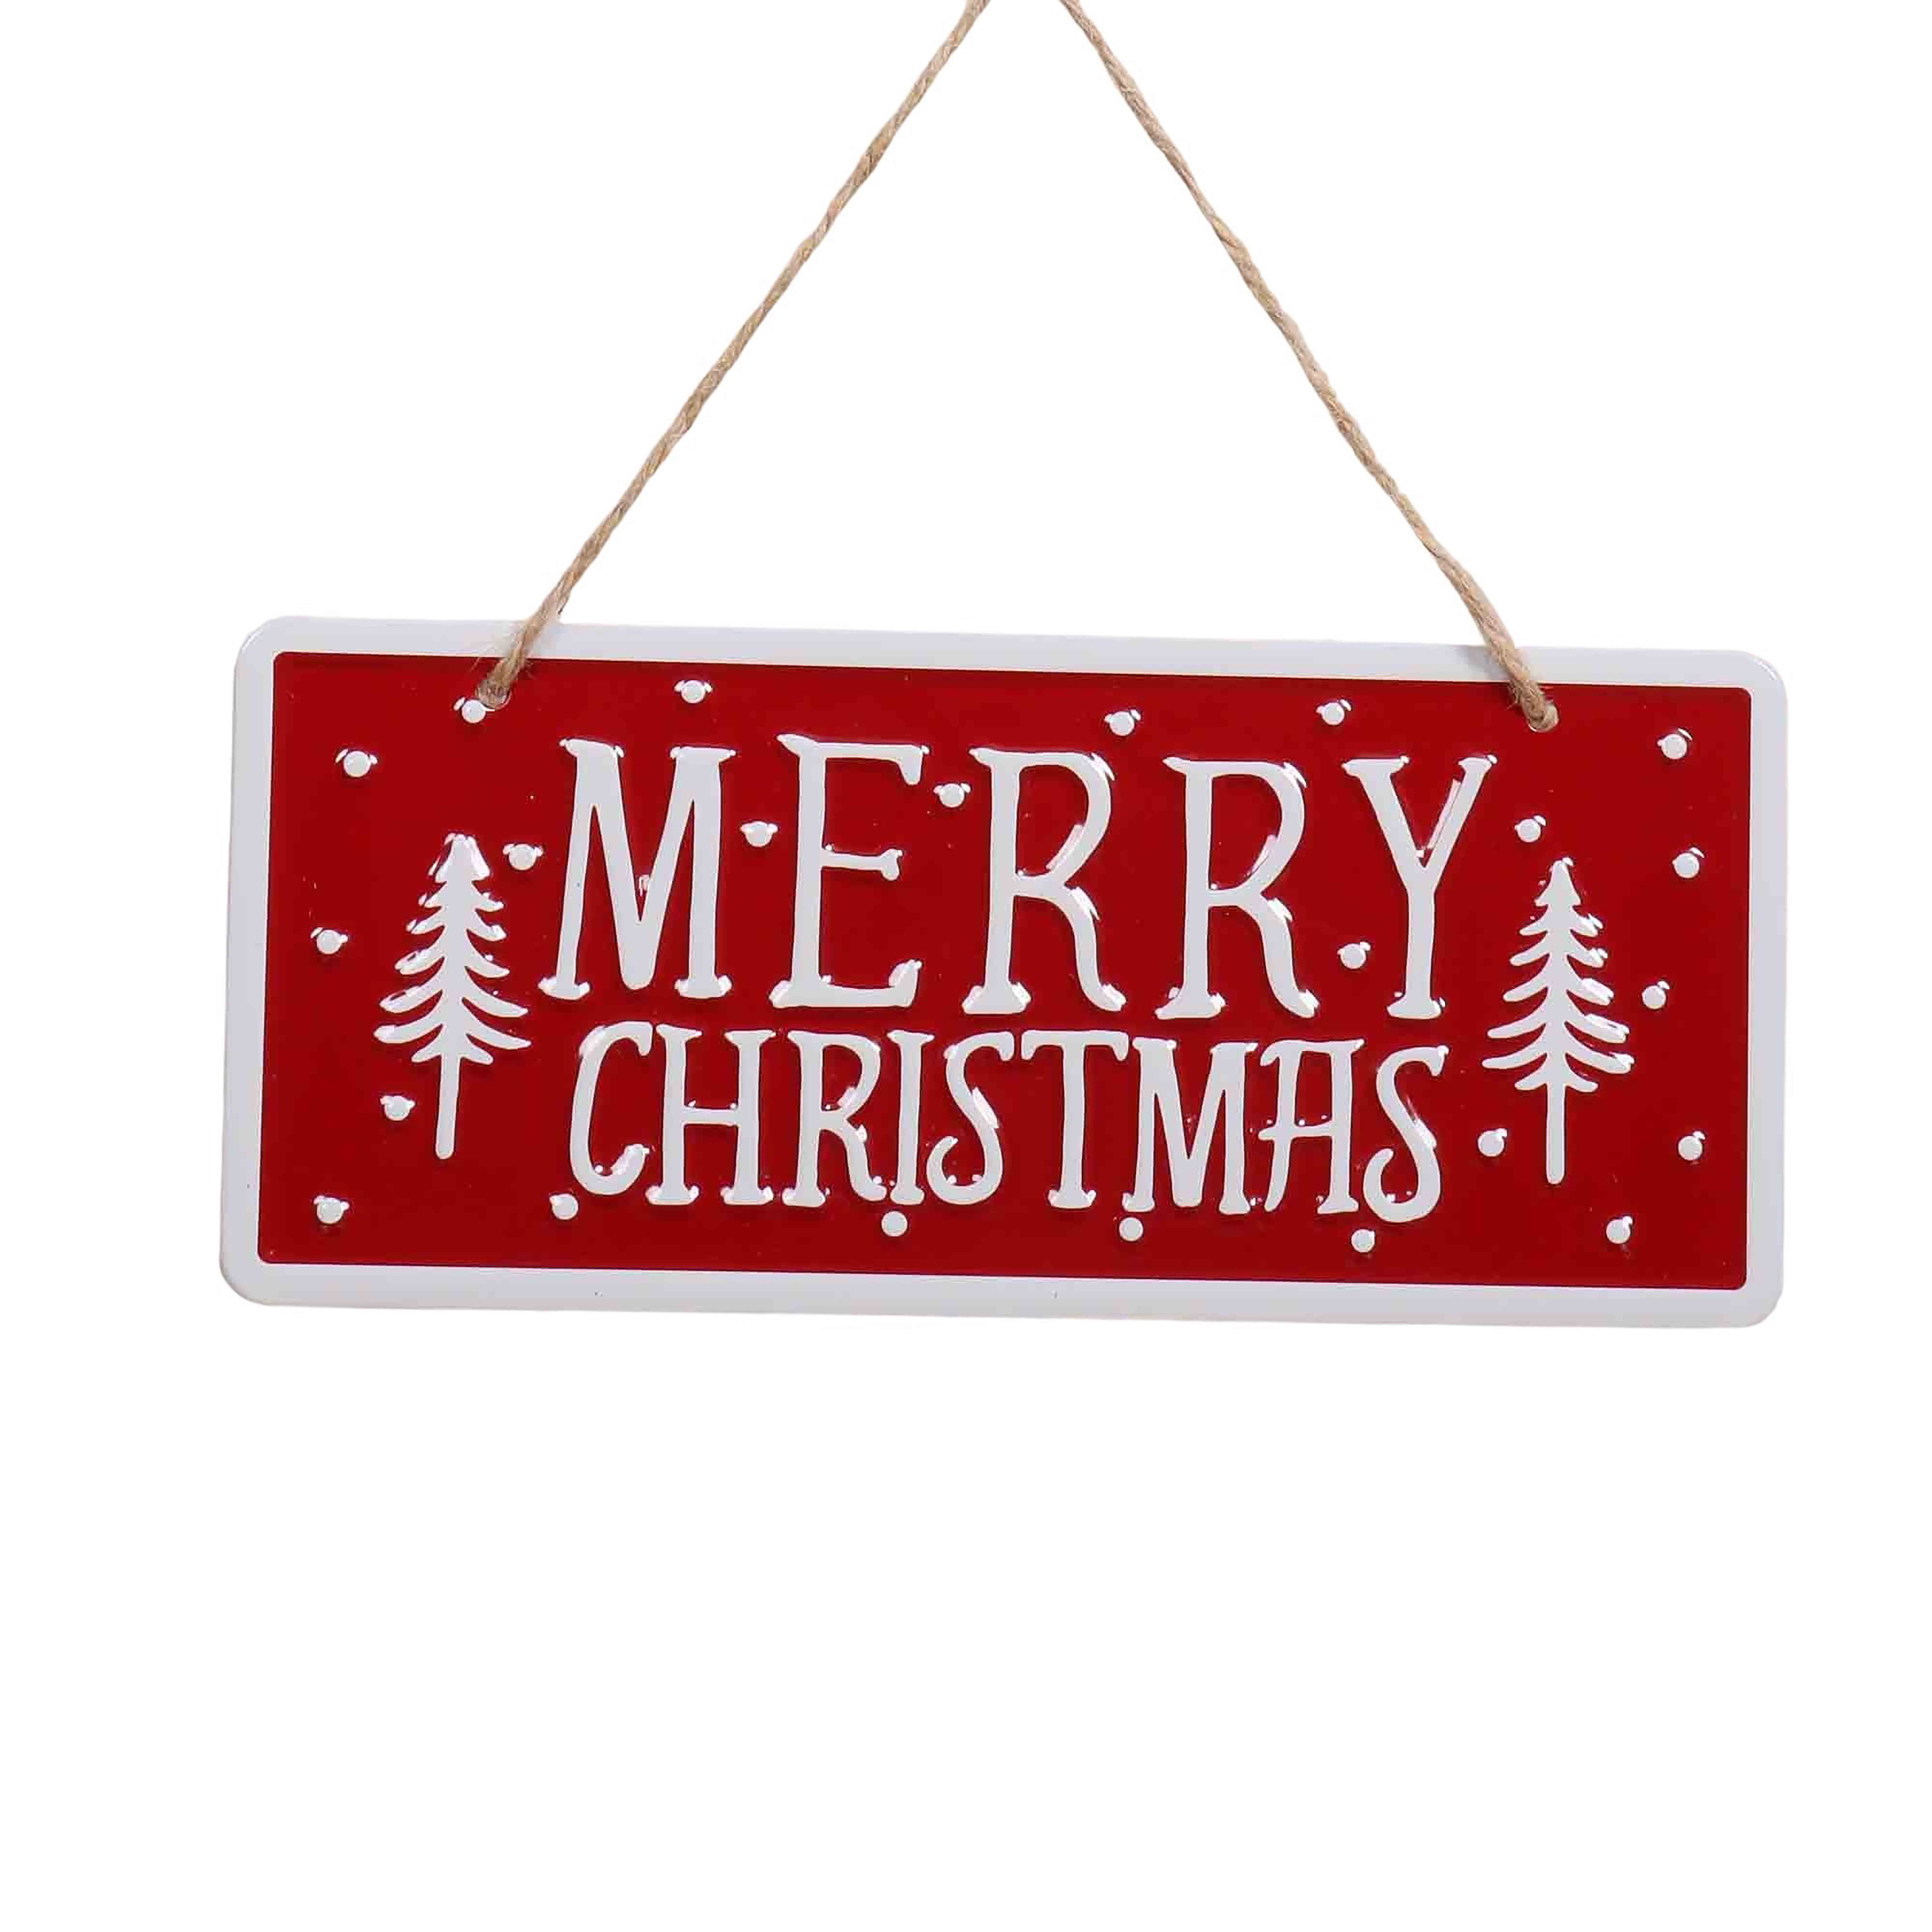 Holiday Time Red and White Metal Plaque With Wording "Merry Christmas" Ornament, 1""